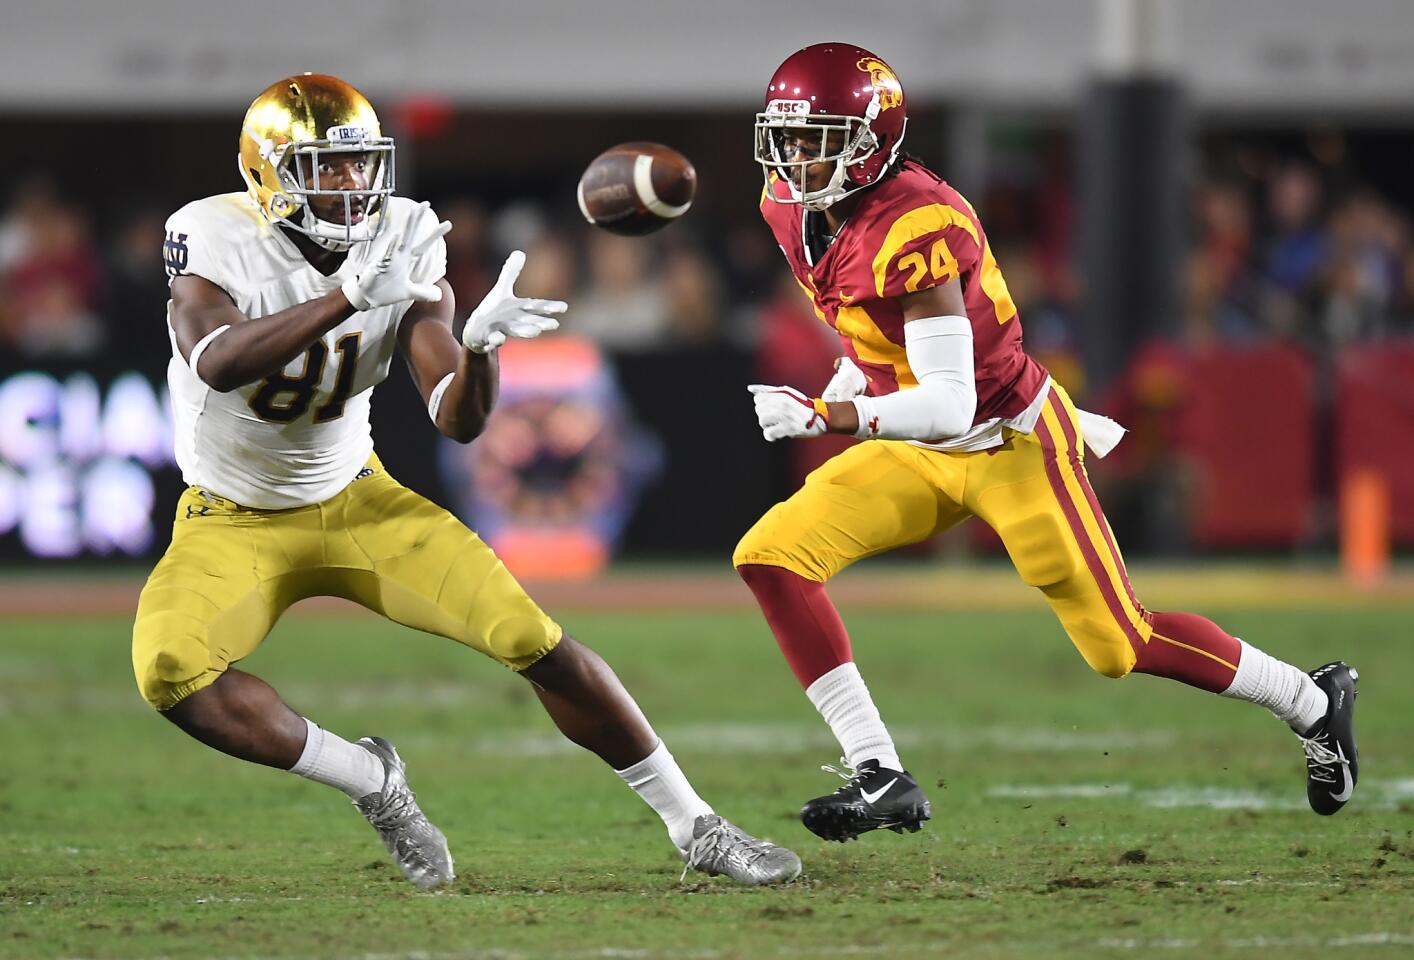 Notre Dame tight end Miles Boykin makes a catch in front of USC cornerback Isaiah Langley in the second quarter at the Coliseum.